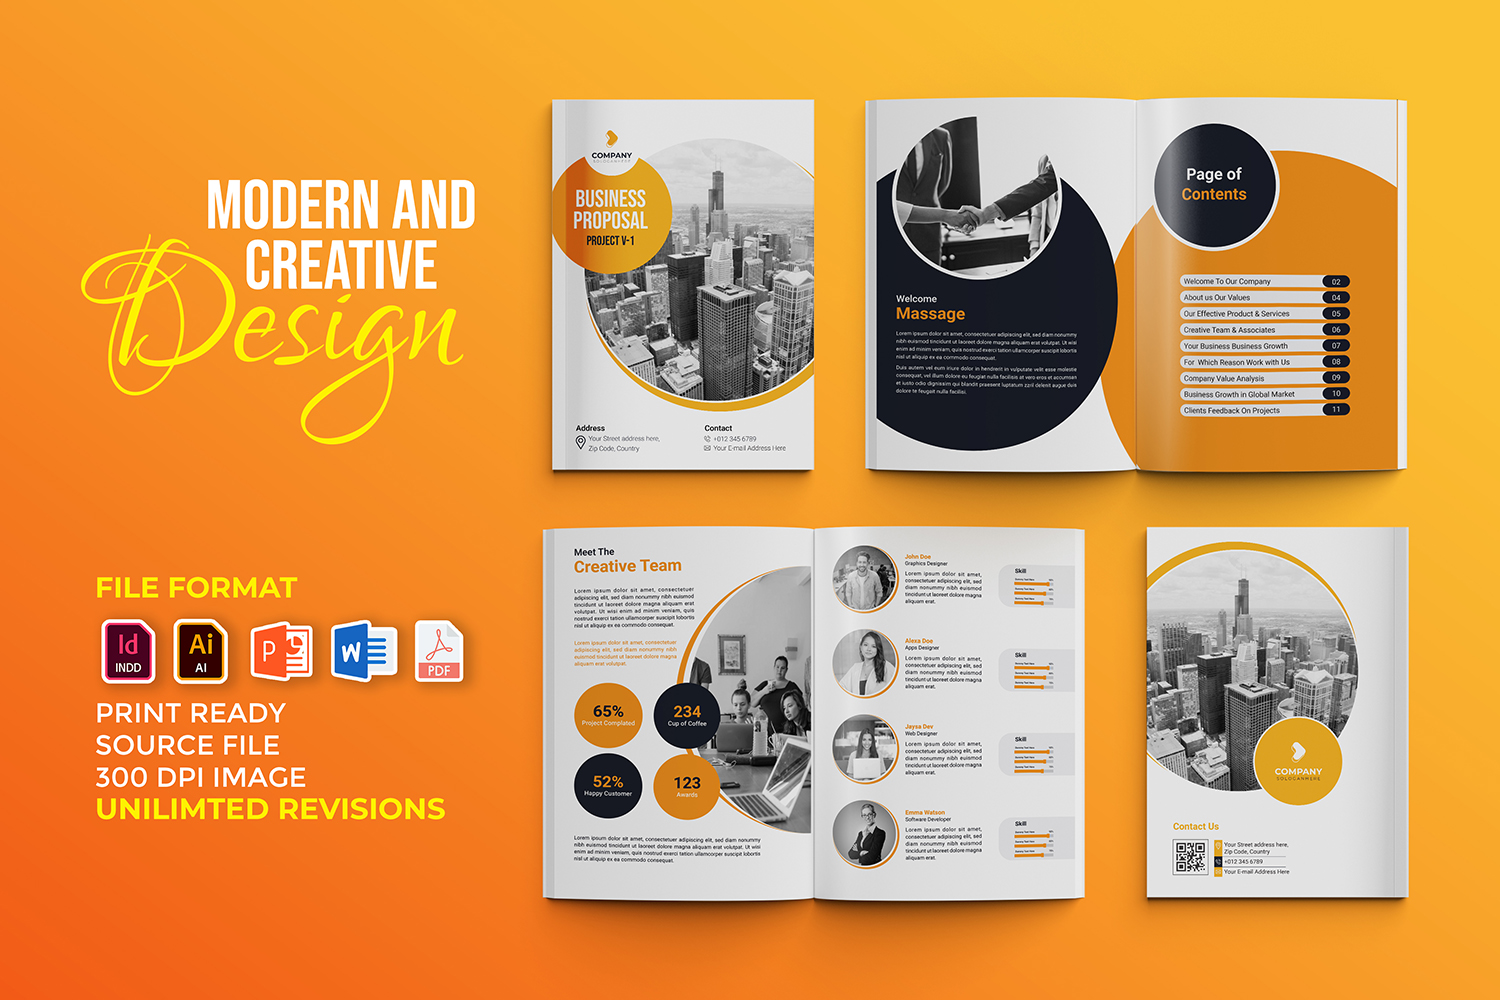 Modern and Creative Business Proposal Template - Circle Design - Orange, Black and White Color Theme